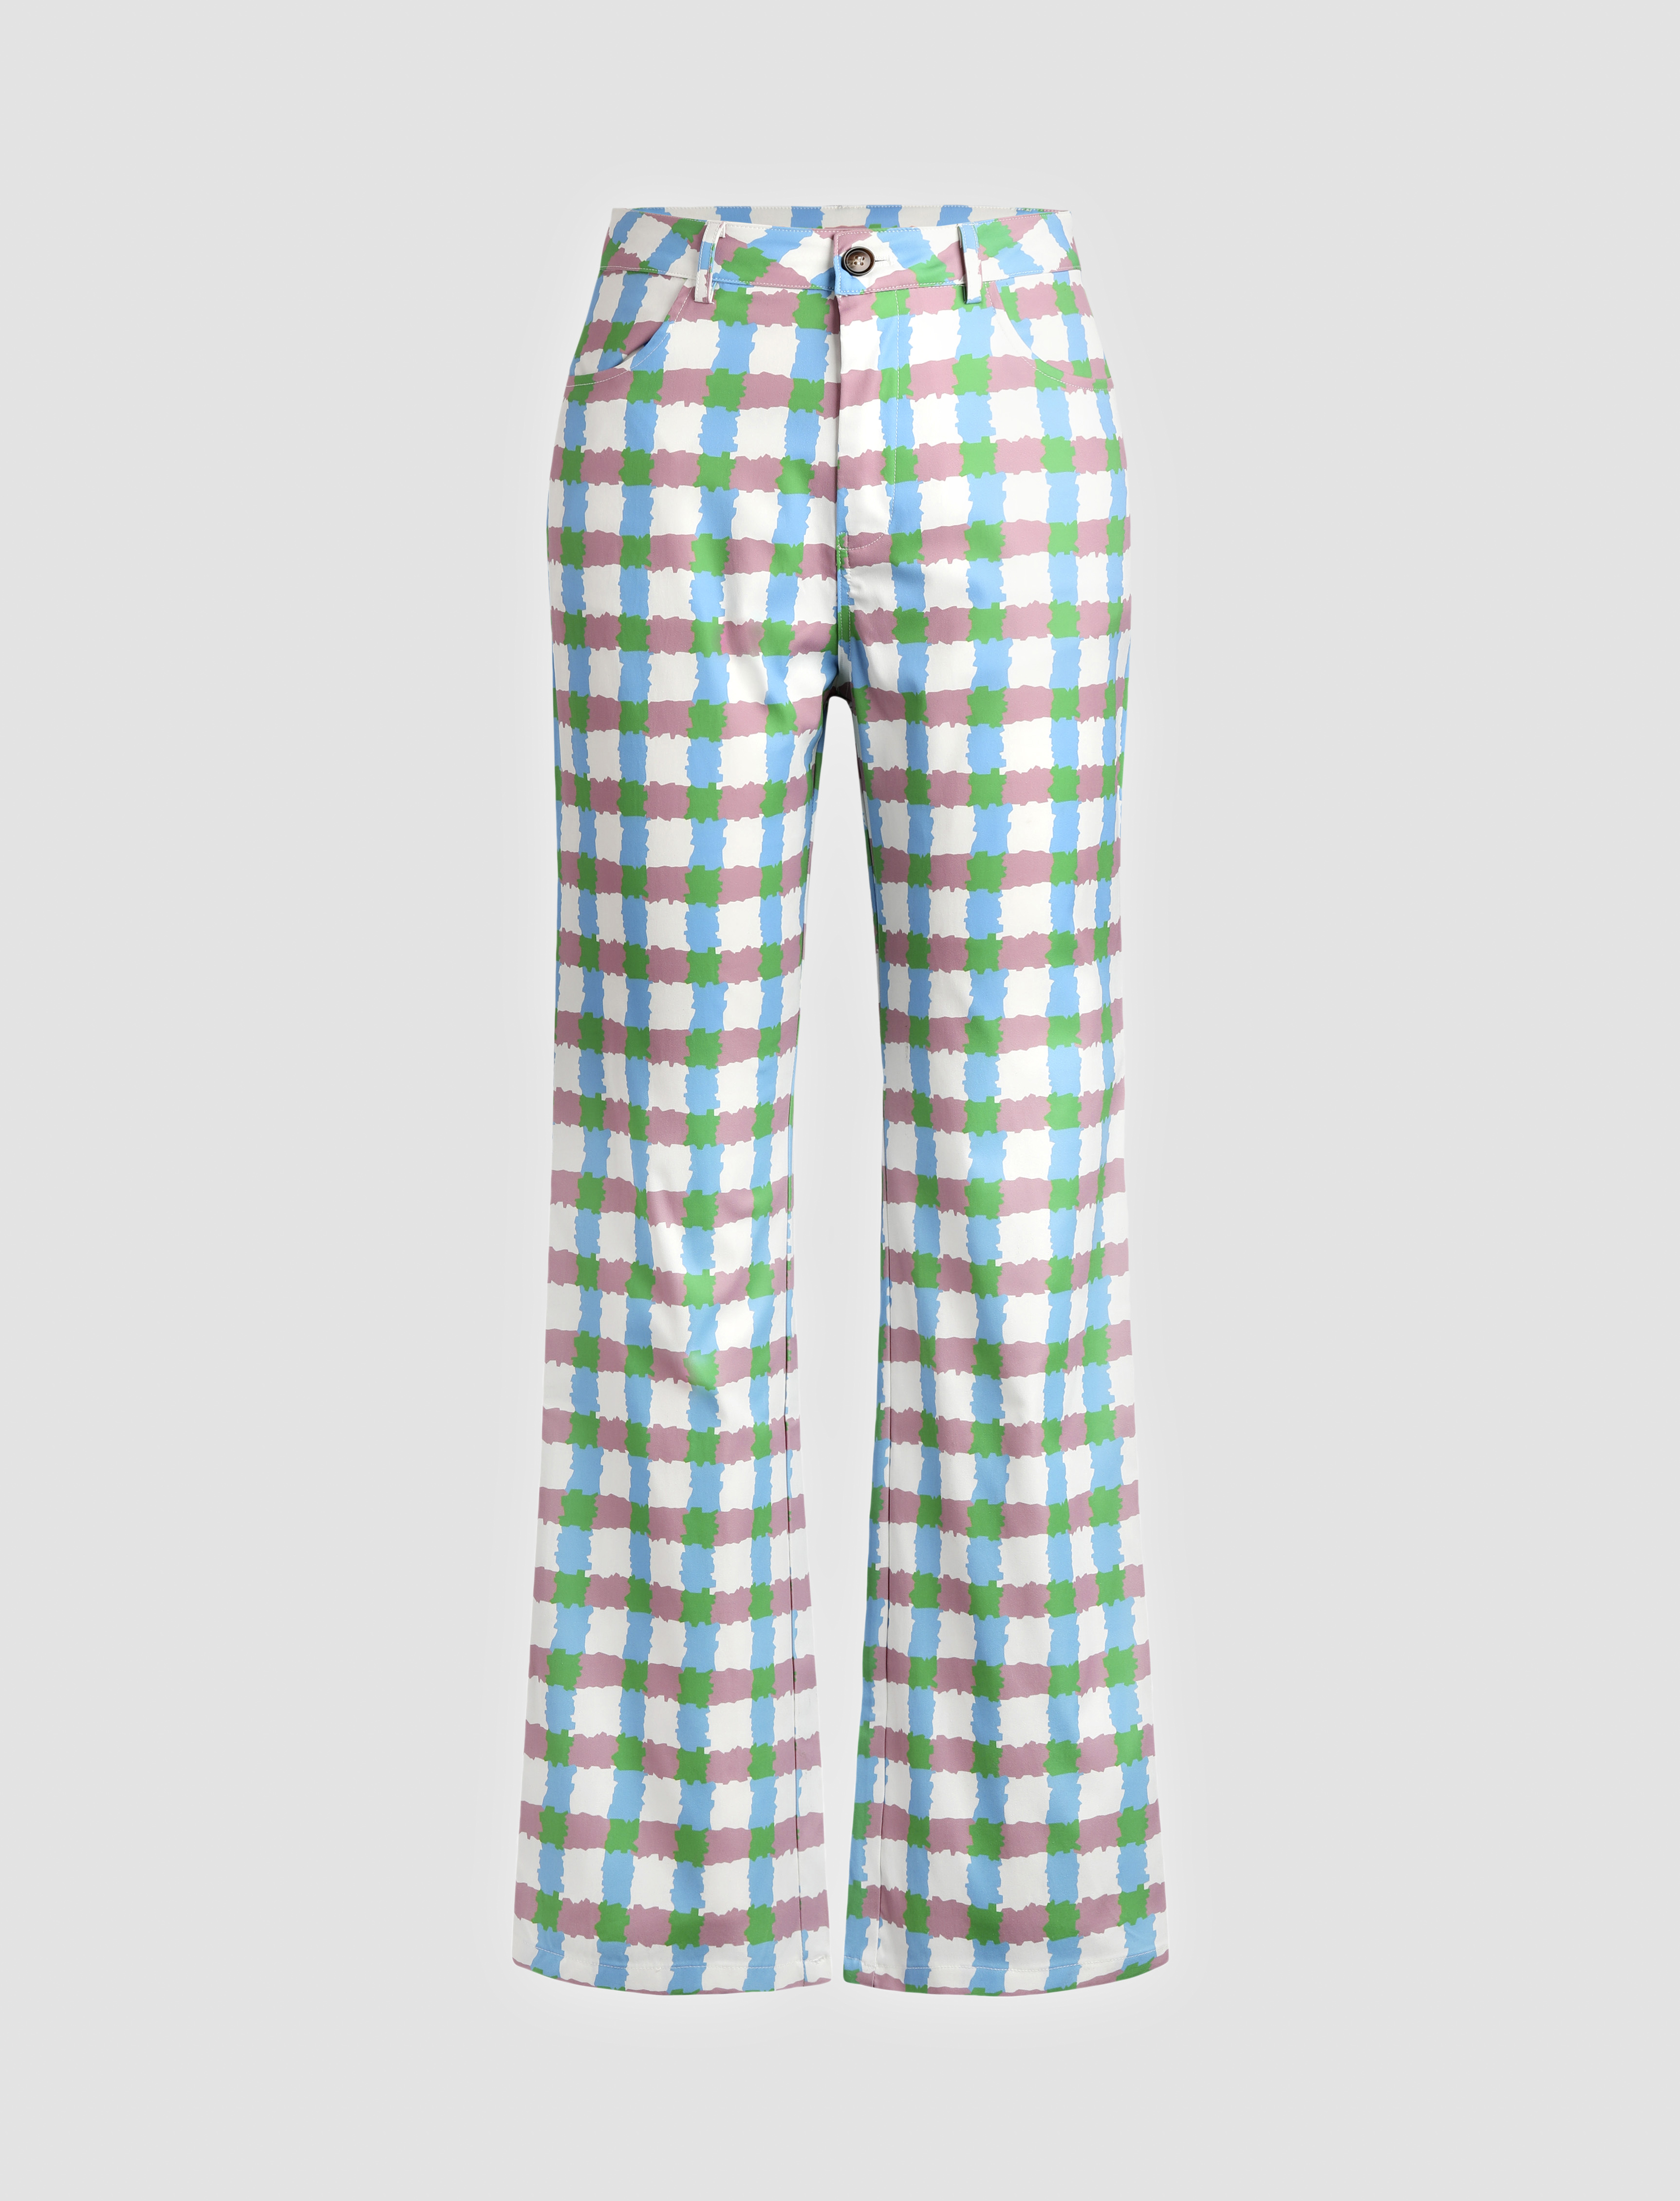 Chef Trousers Pant Gingham Check Kitchen Blue & White Uniform Elasticated  Food | eBay